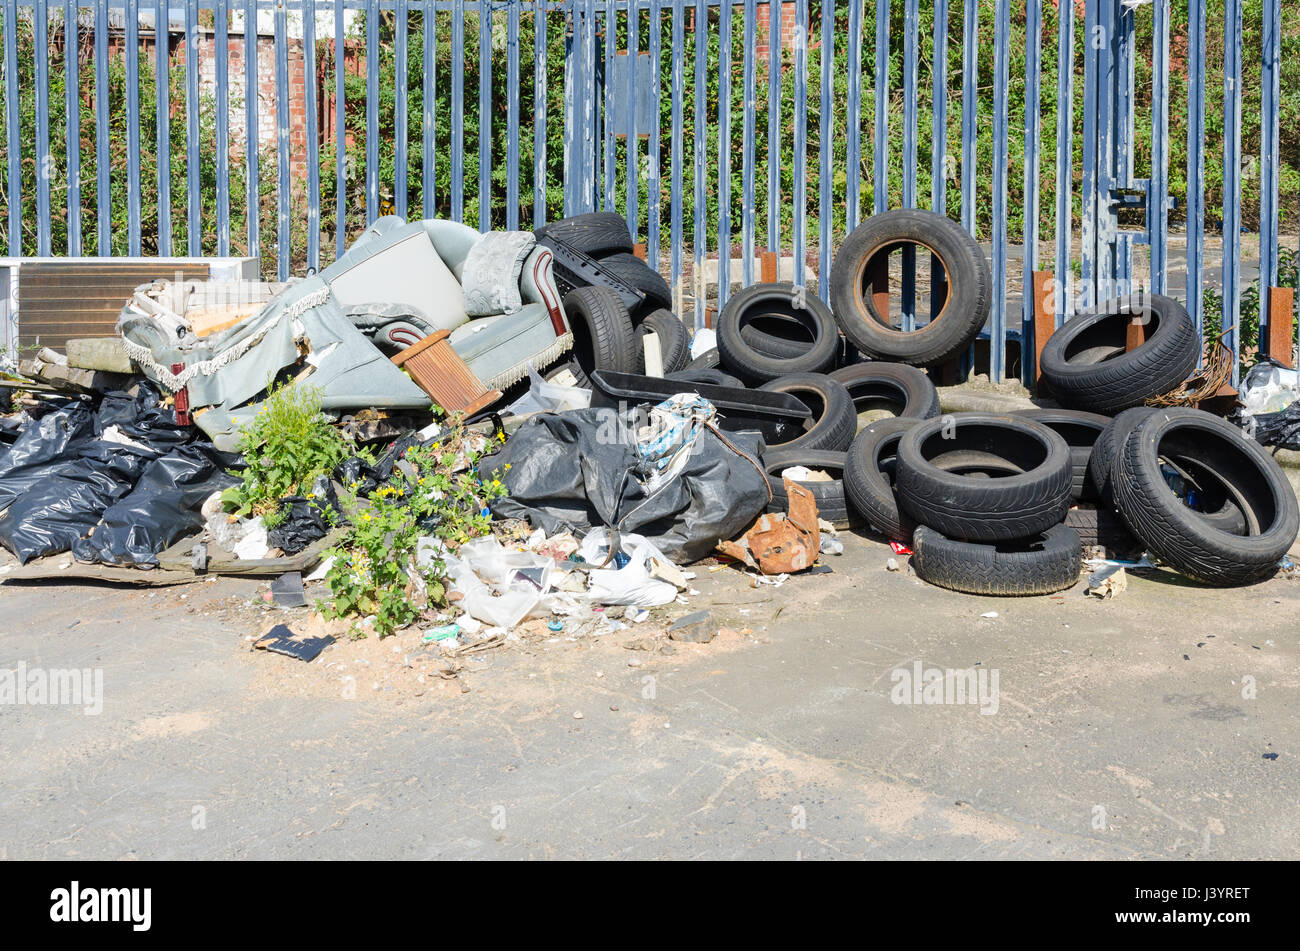 Pile of rubbish resulting from fly tipping including car tyres and sofa Stock Photo